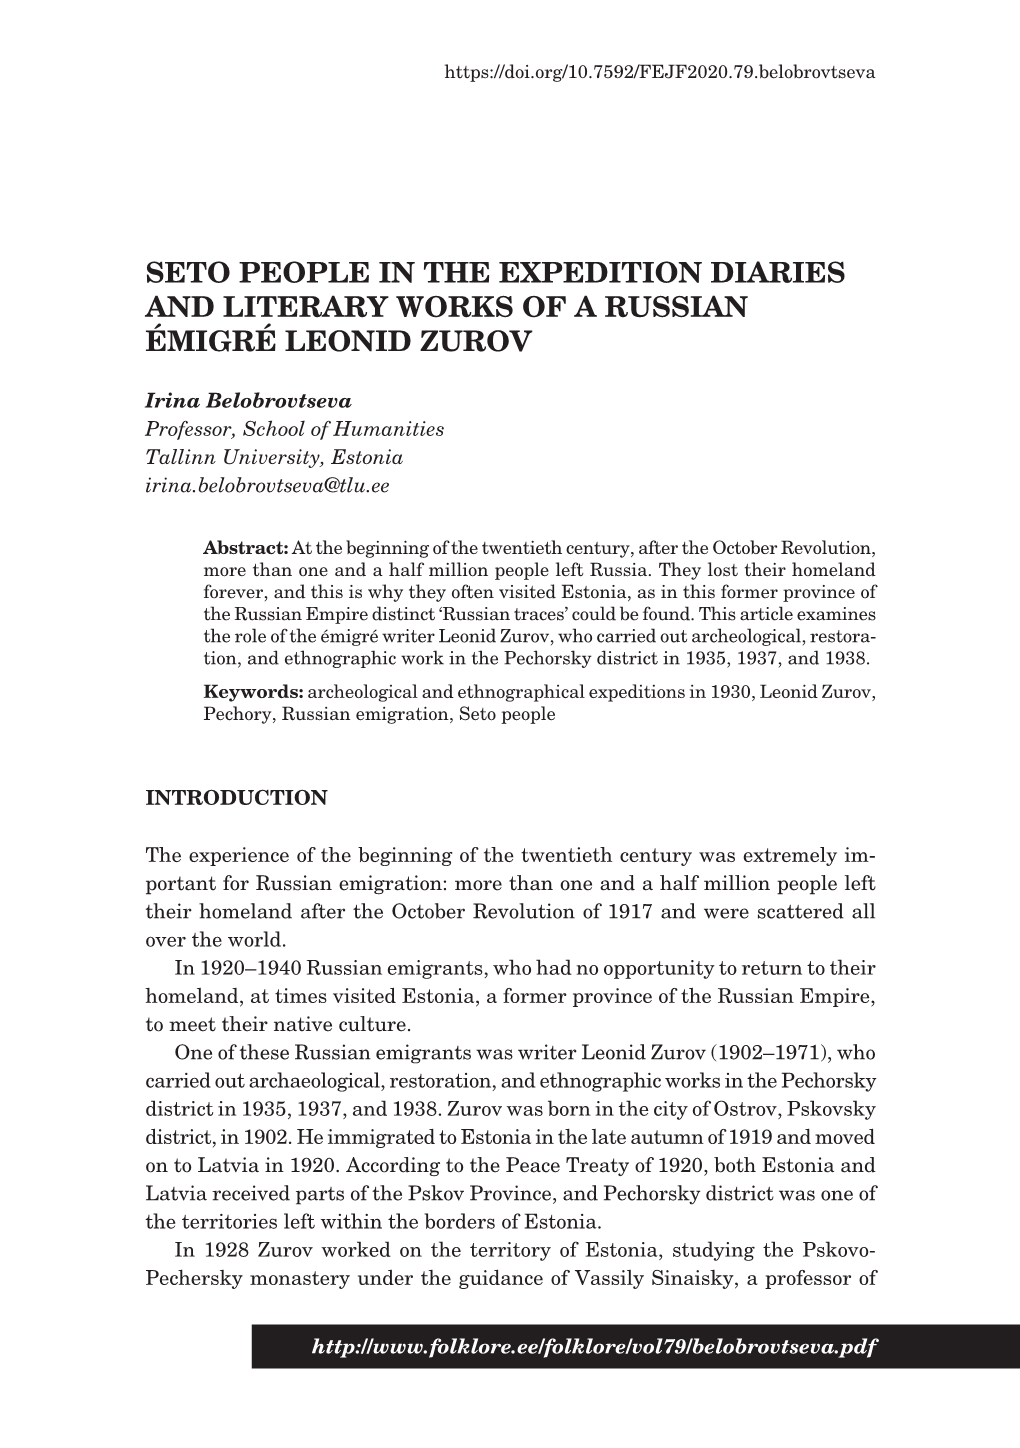 Seto People in the Expedition Diaries and Literary Works of a Russian Émigré Leonid Zurov